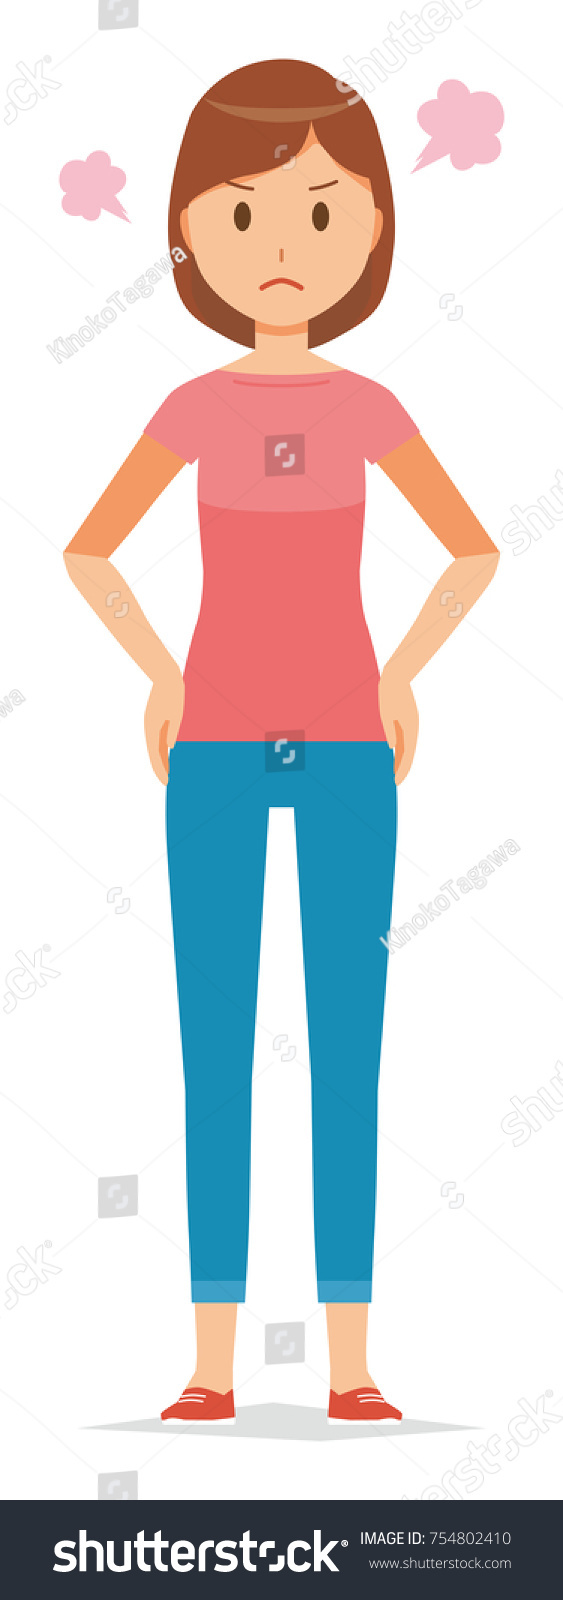 Illustration That Moms Wearing Shortsleeved Clothes Stock Vector